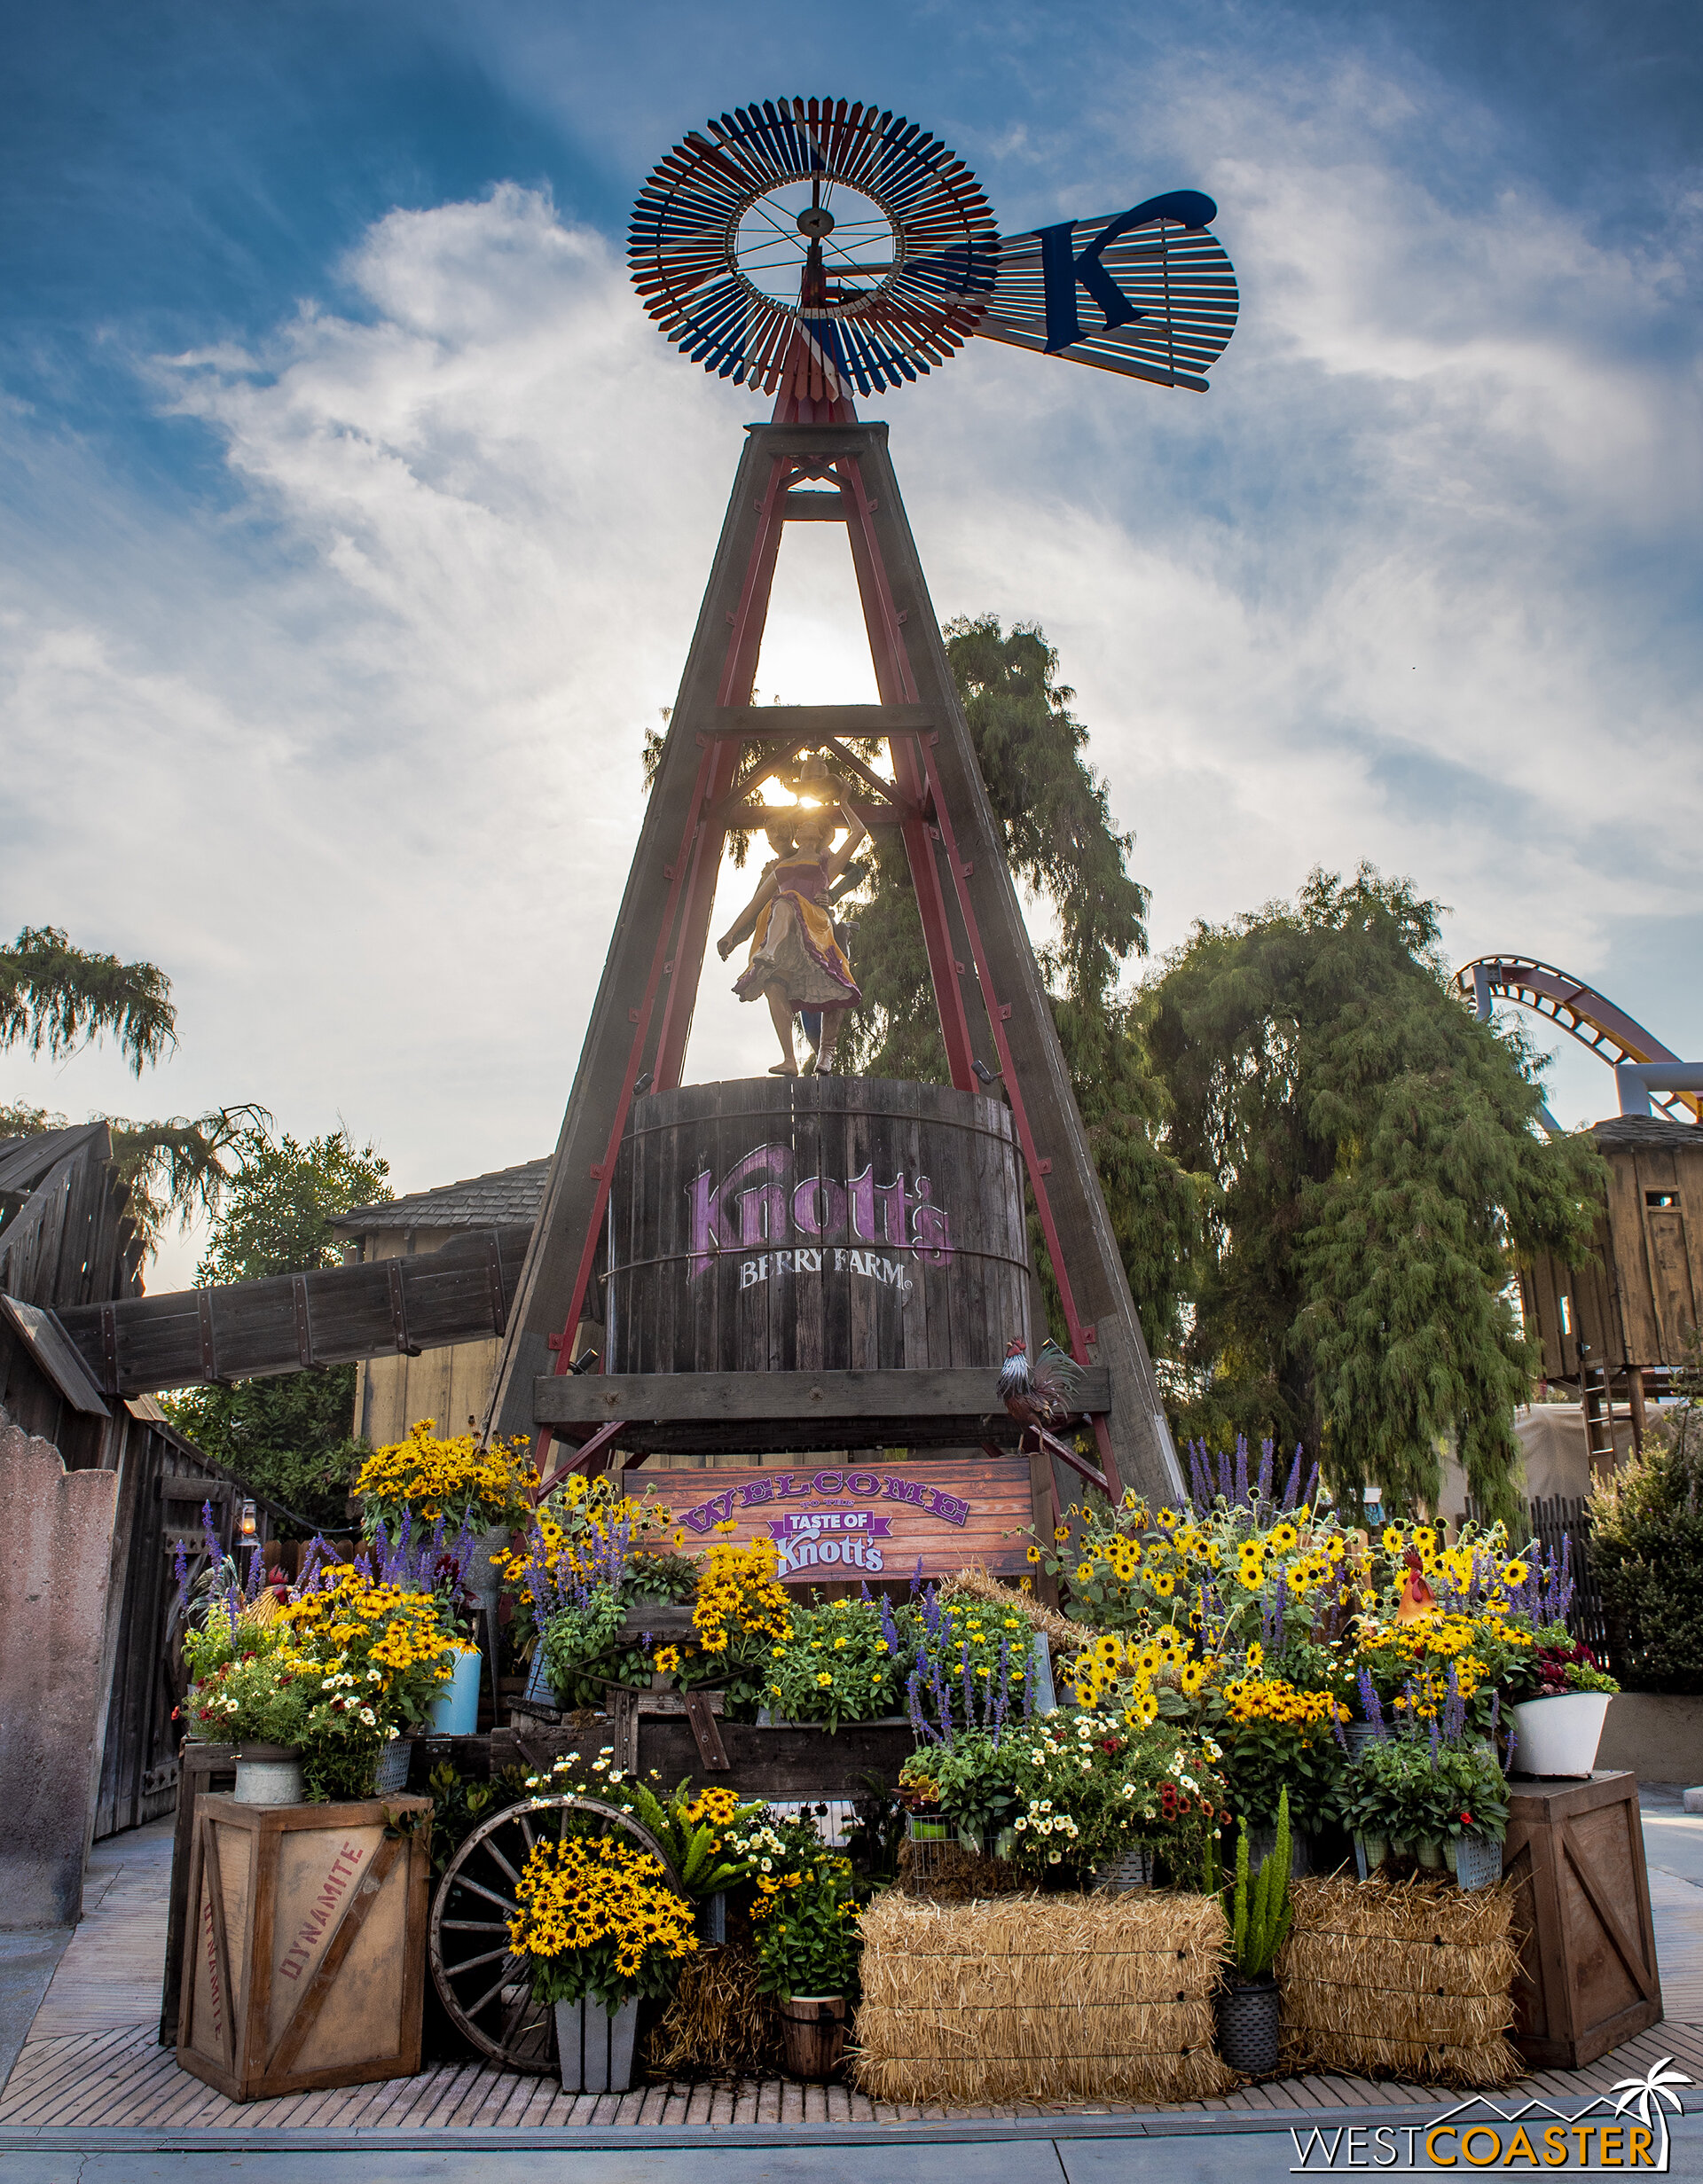  Another beautiful photo op backdrop for the Taste of Knott’s event. 